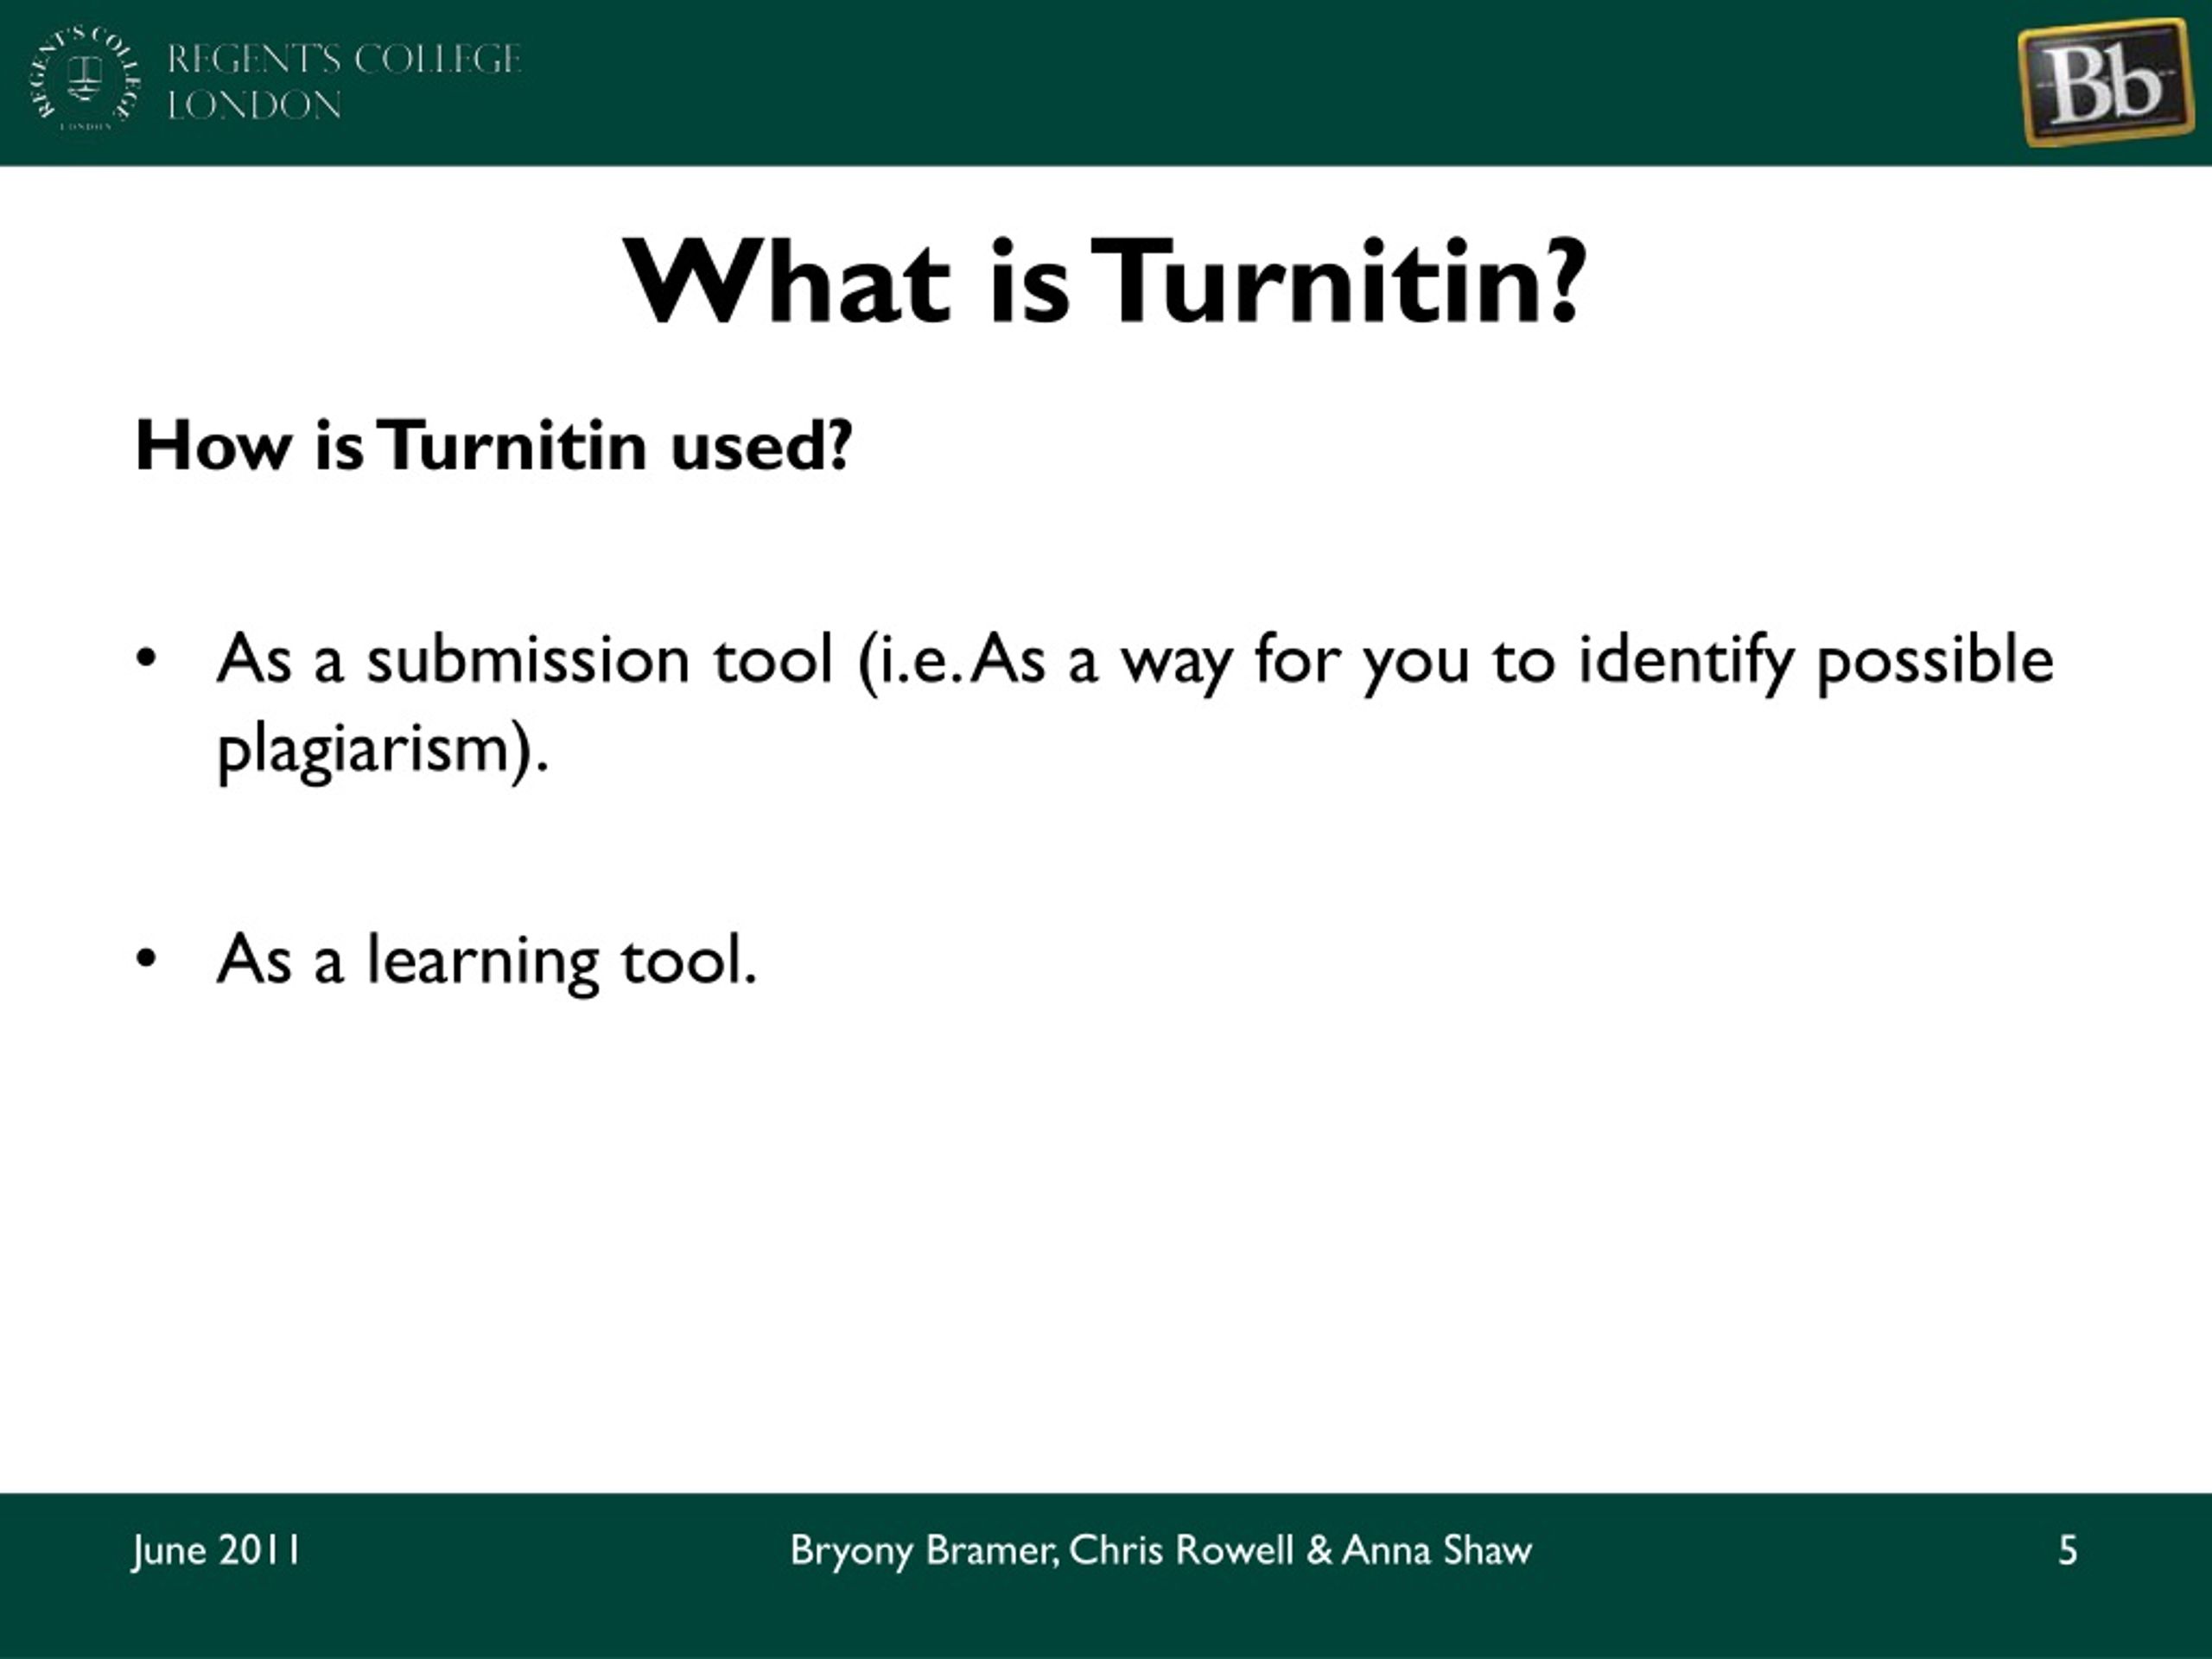 what is turnitin